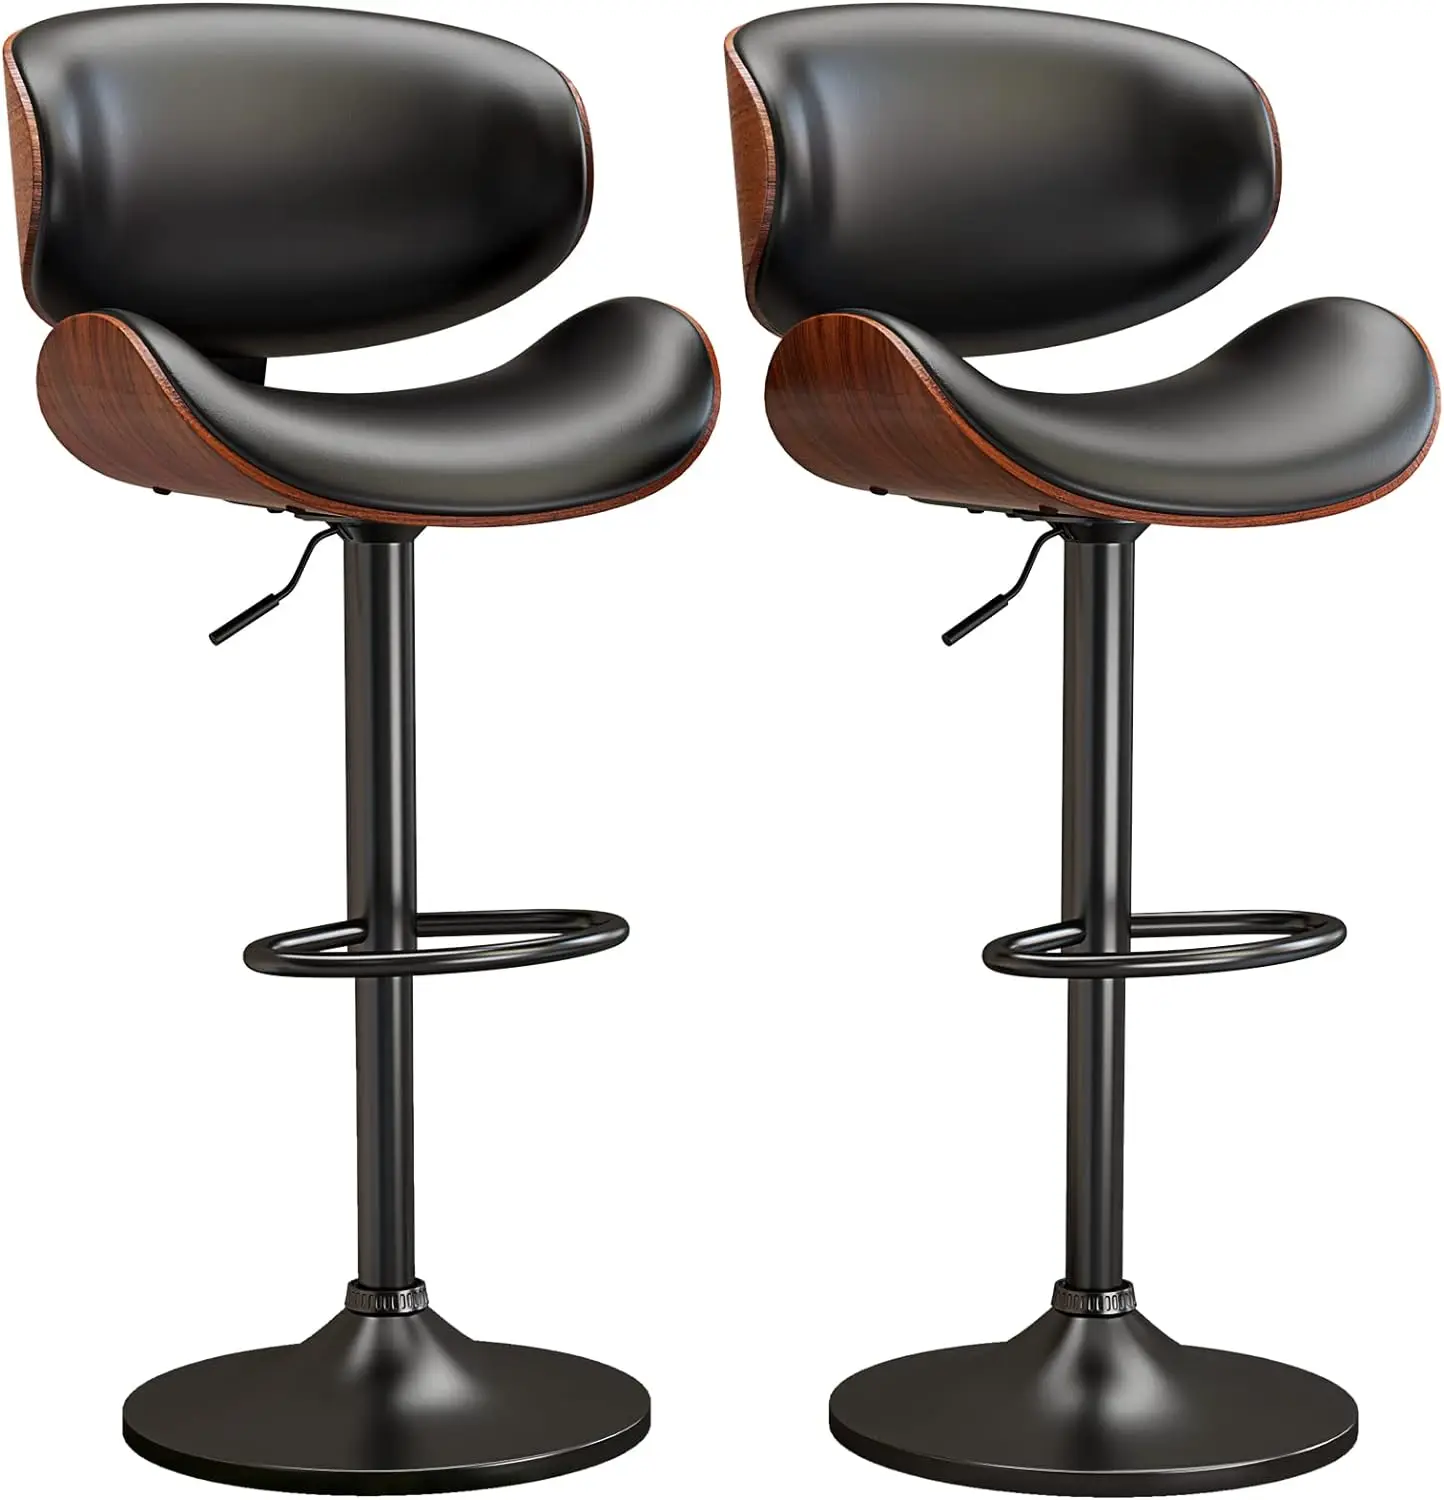 

Swivel Bar Stools Set of 2 for Kitchen Counter, Adjustable Bentwood Barstools, Modern PU Leather Upholstered Bar Chair